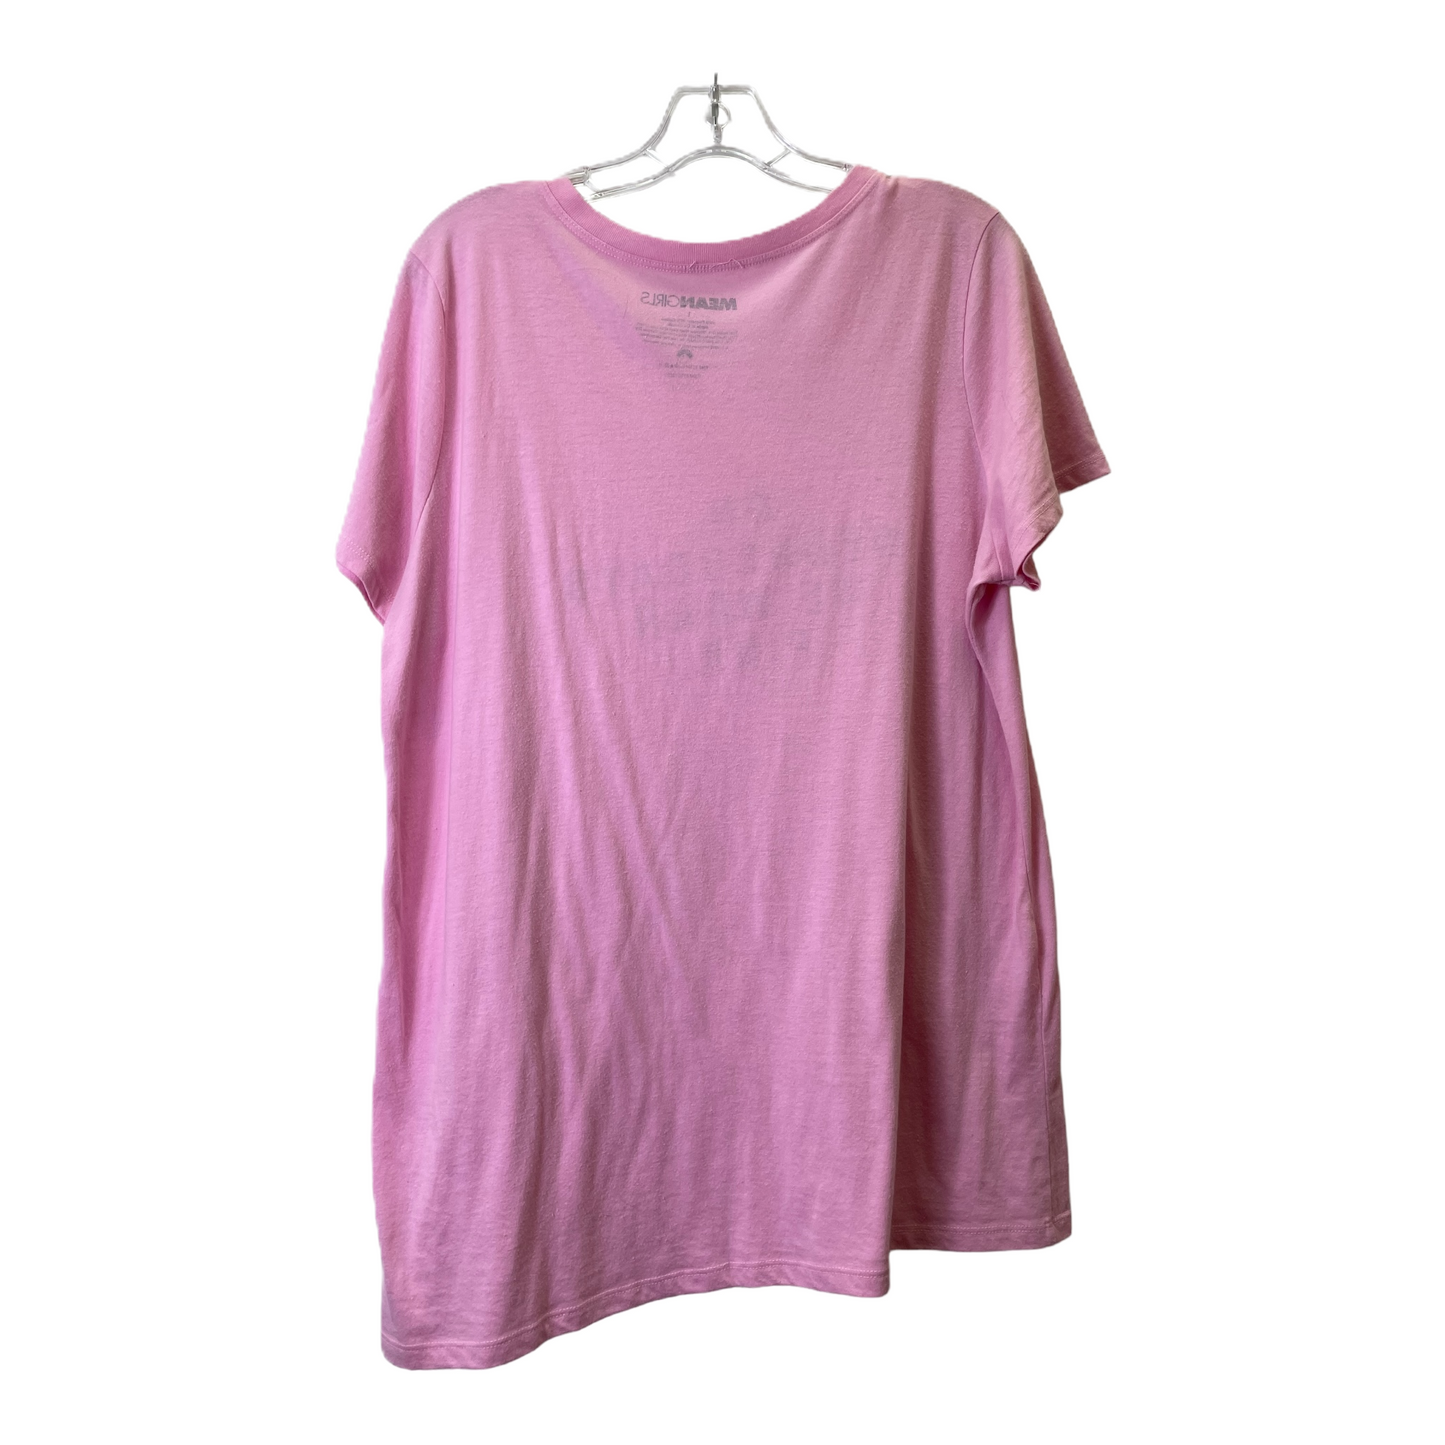 Pink Top Short Sleeve By Torrid, Size: 1x